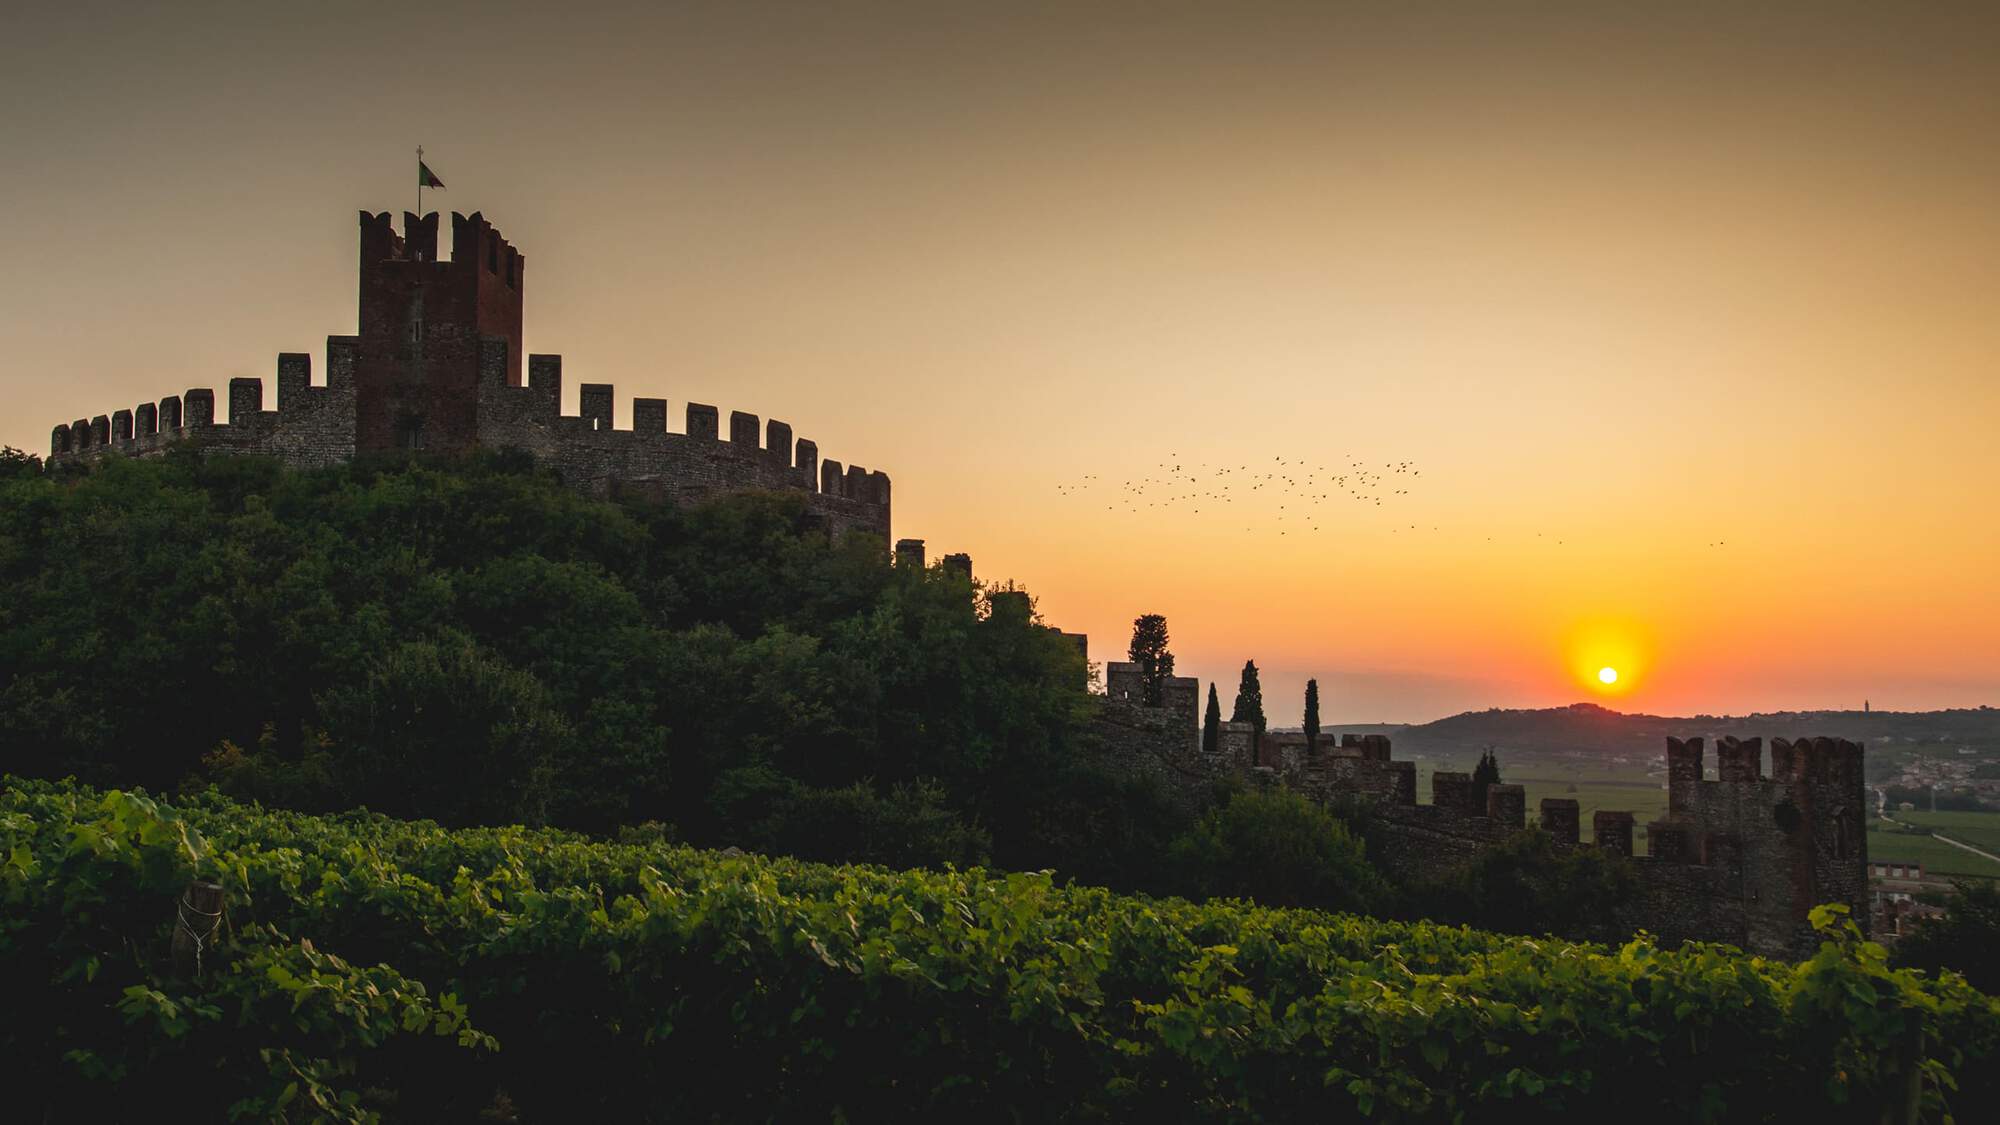 Beautiful sunset, Italian castle and lush Vineyard in the foreground.